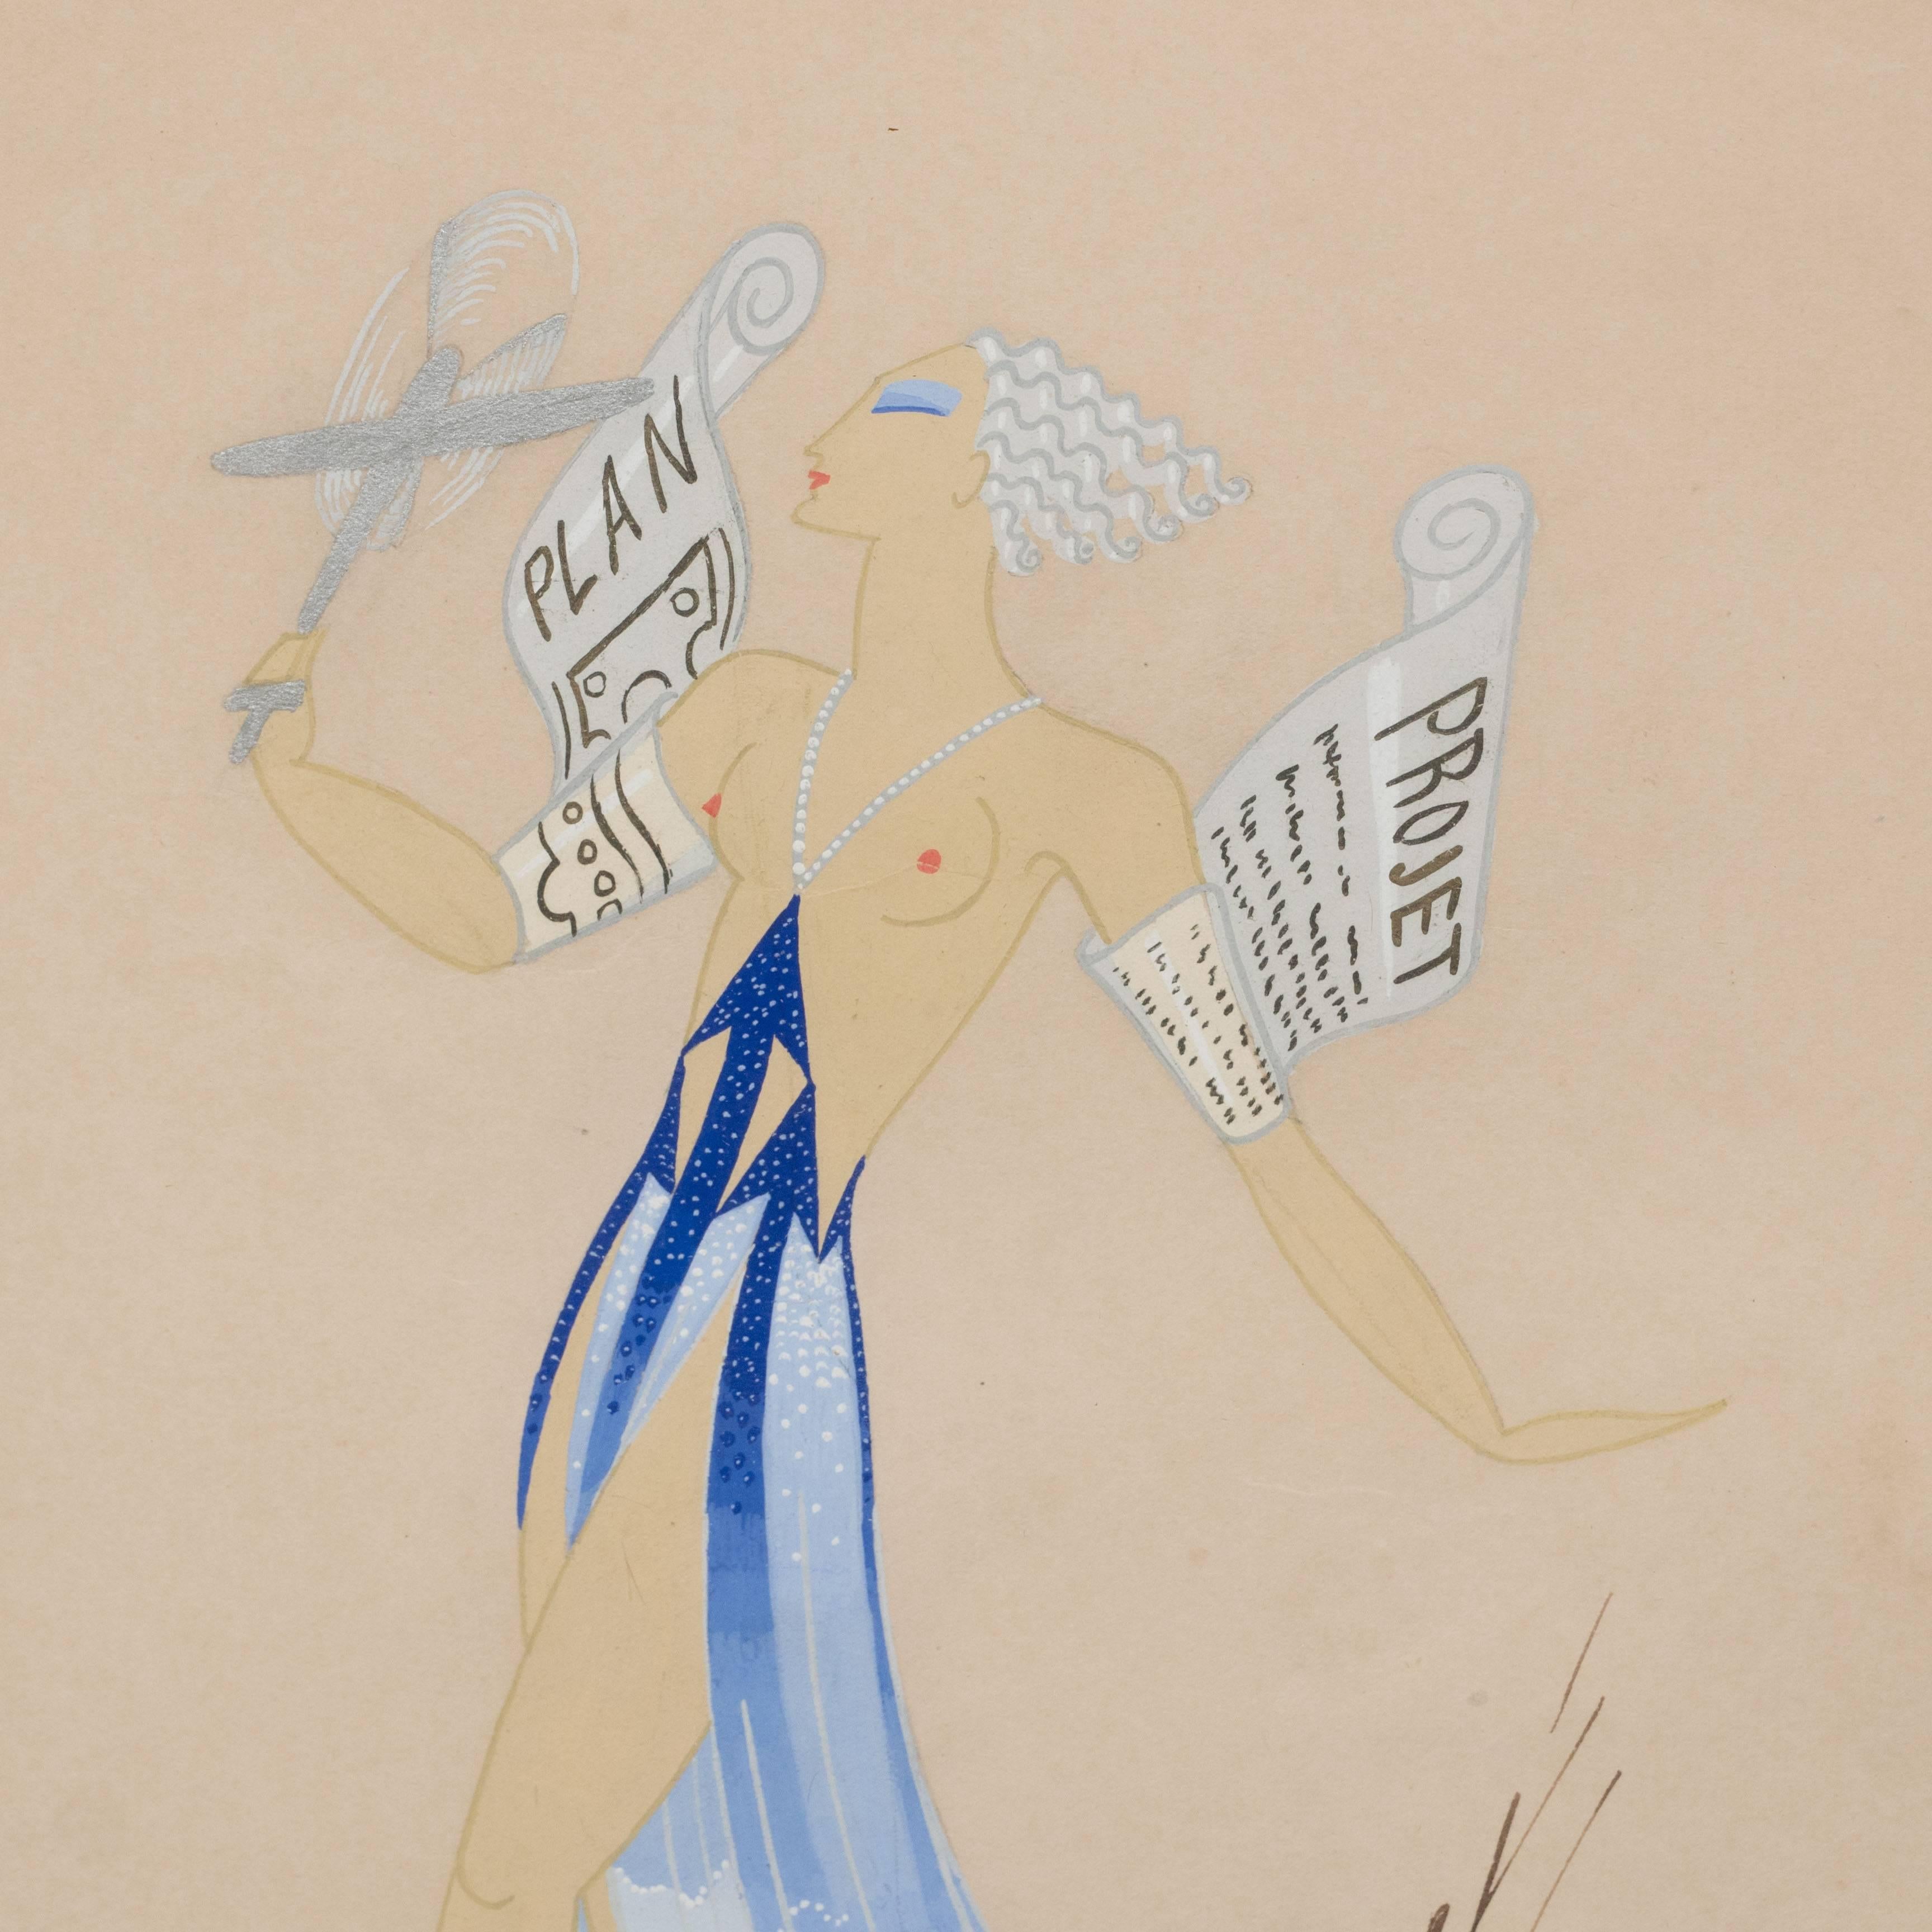 Vibrant original Art Deco gouache on paper of a theatrical costume design signed Erte at the lower right. An exquisite stylized depiction of a female figure posed in a revealing evening dress holding a propeller plane by the tail in her right hand.